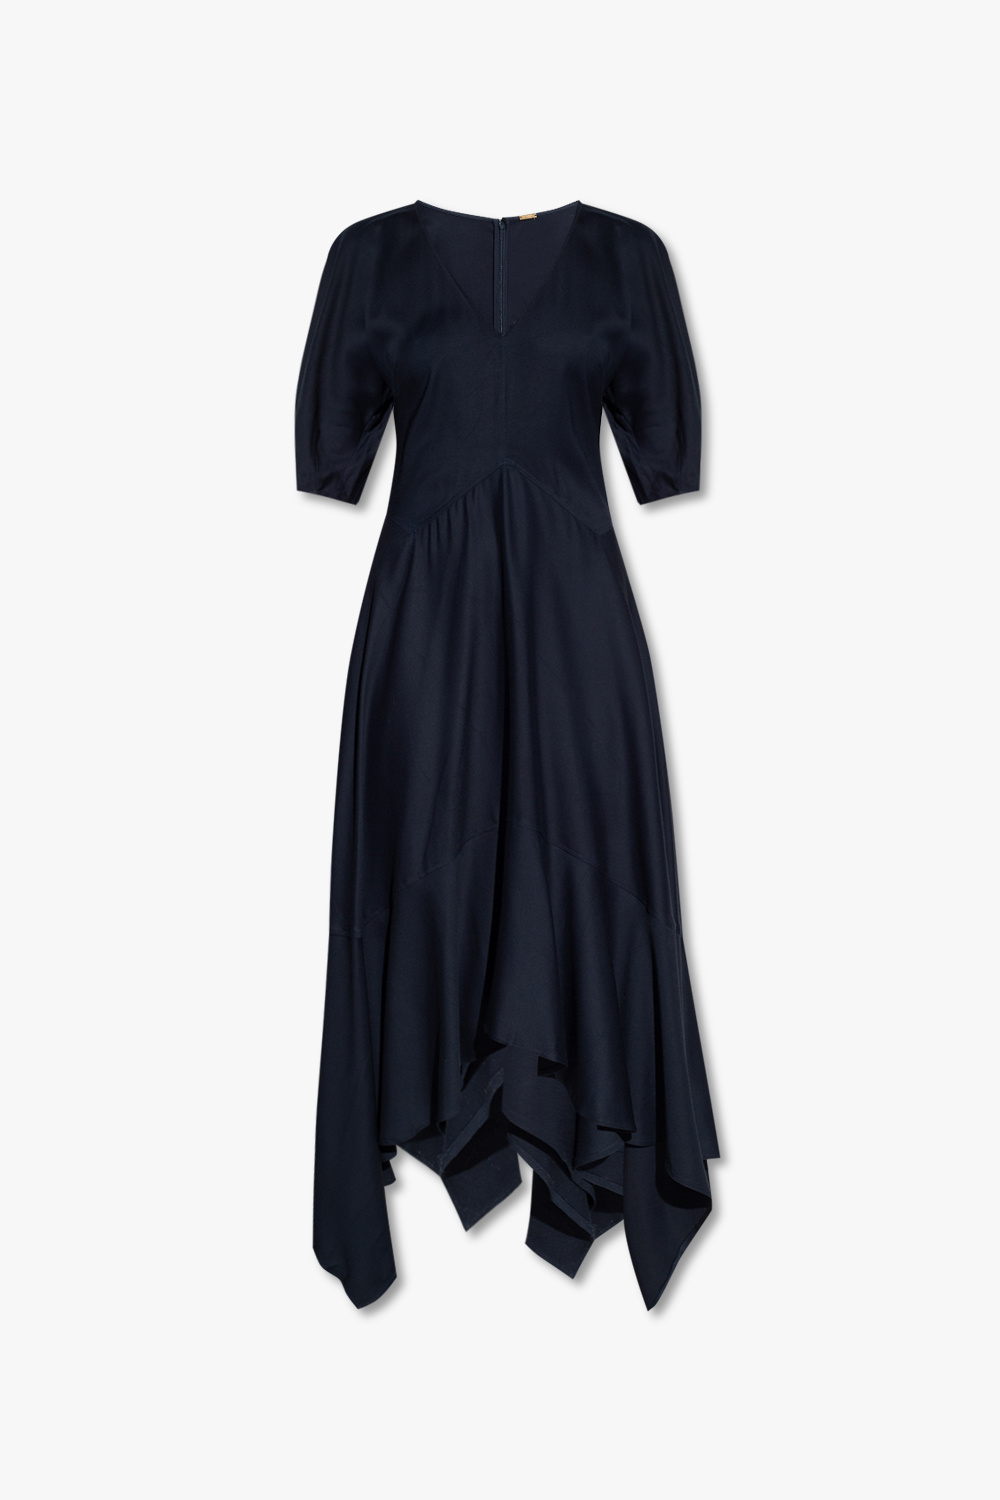 Cult Gaia ‘Vienna’ dress with puff sleeves